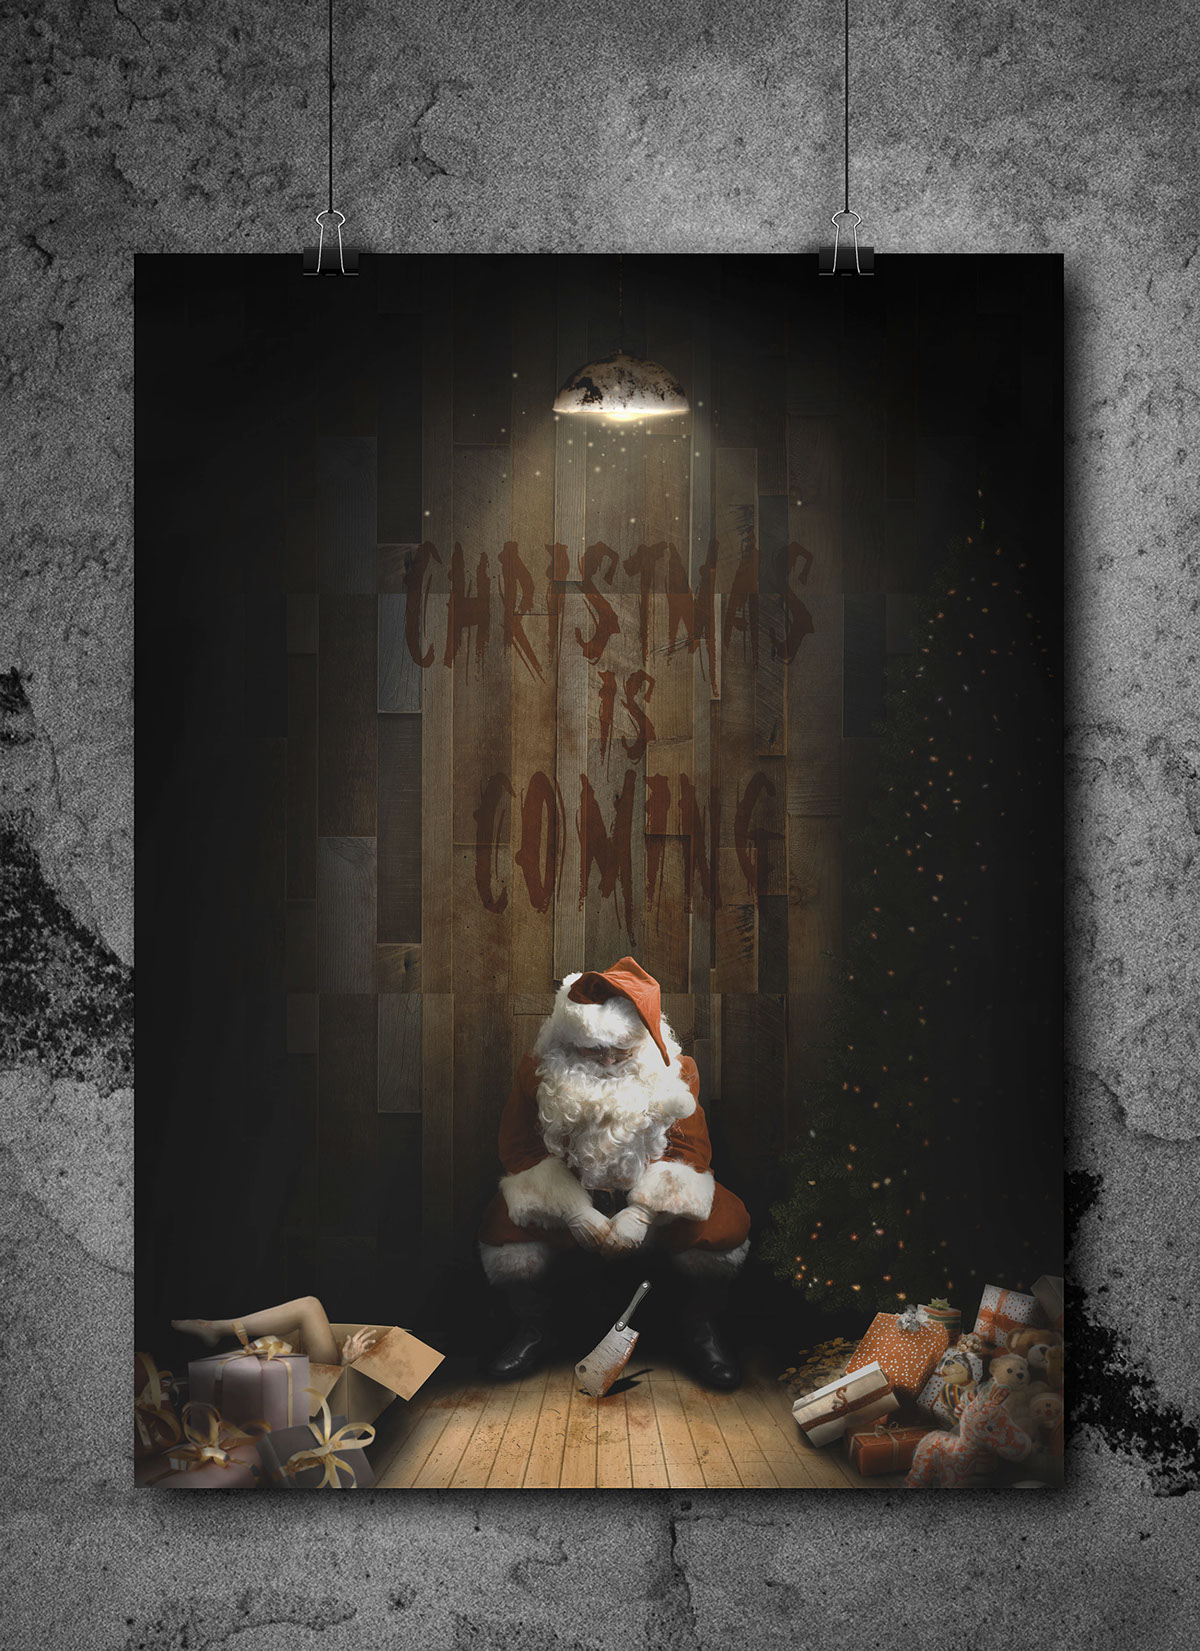 #santachlause #christmas #child #horror   #psycho #dead #gift #kids  